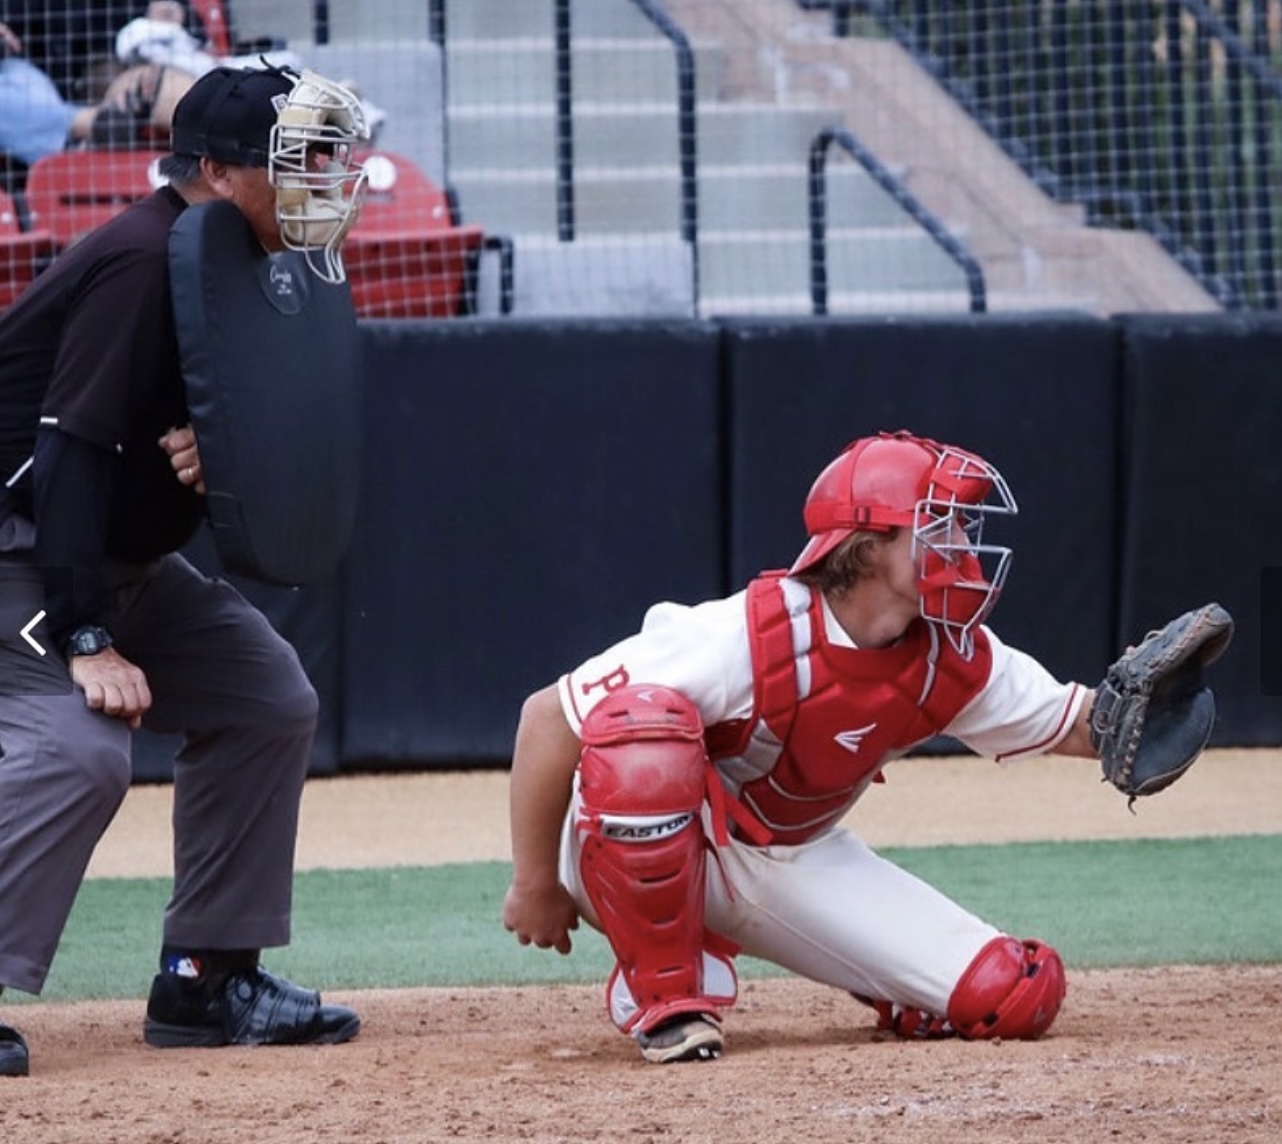 A male Palomar catcher kneels and prepares to catch a baseball with his mitted left hand while an umpire half-squats behind him.